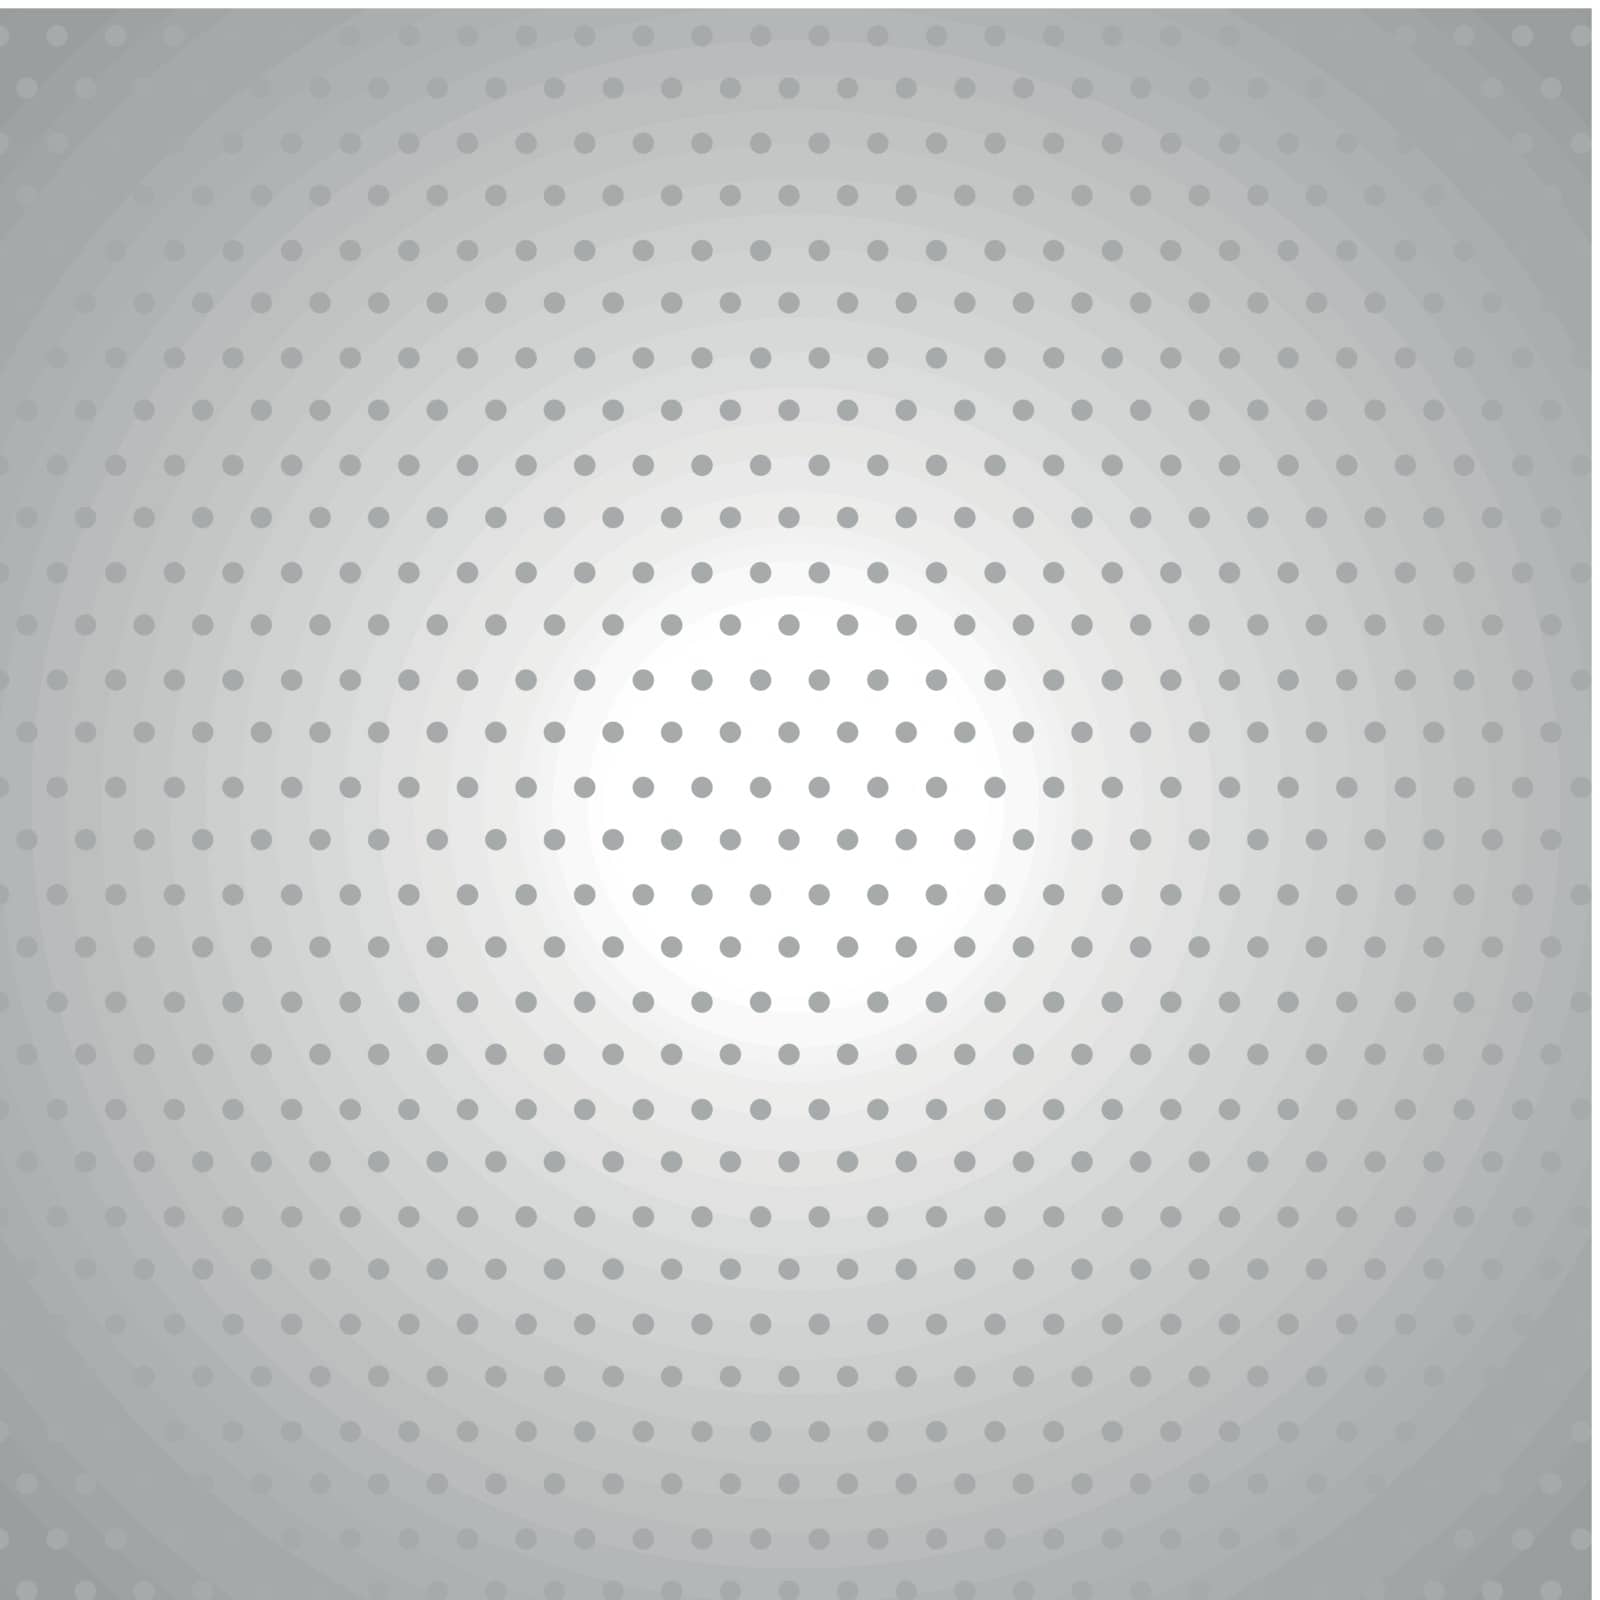 Vector illustration of gray dots background concept